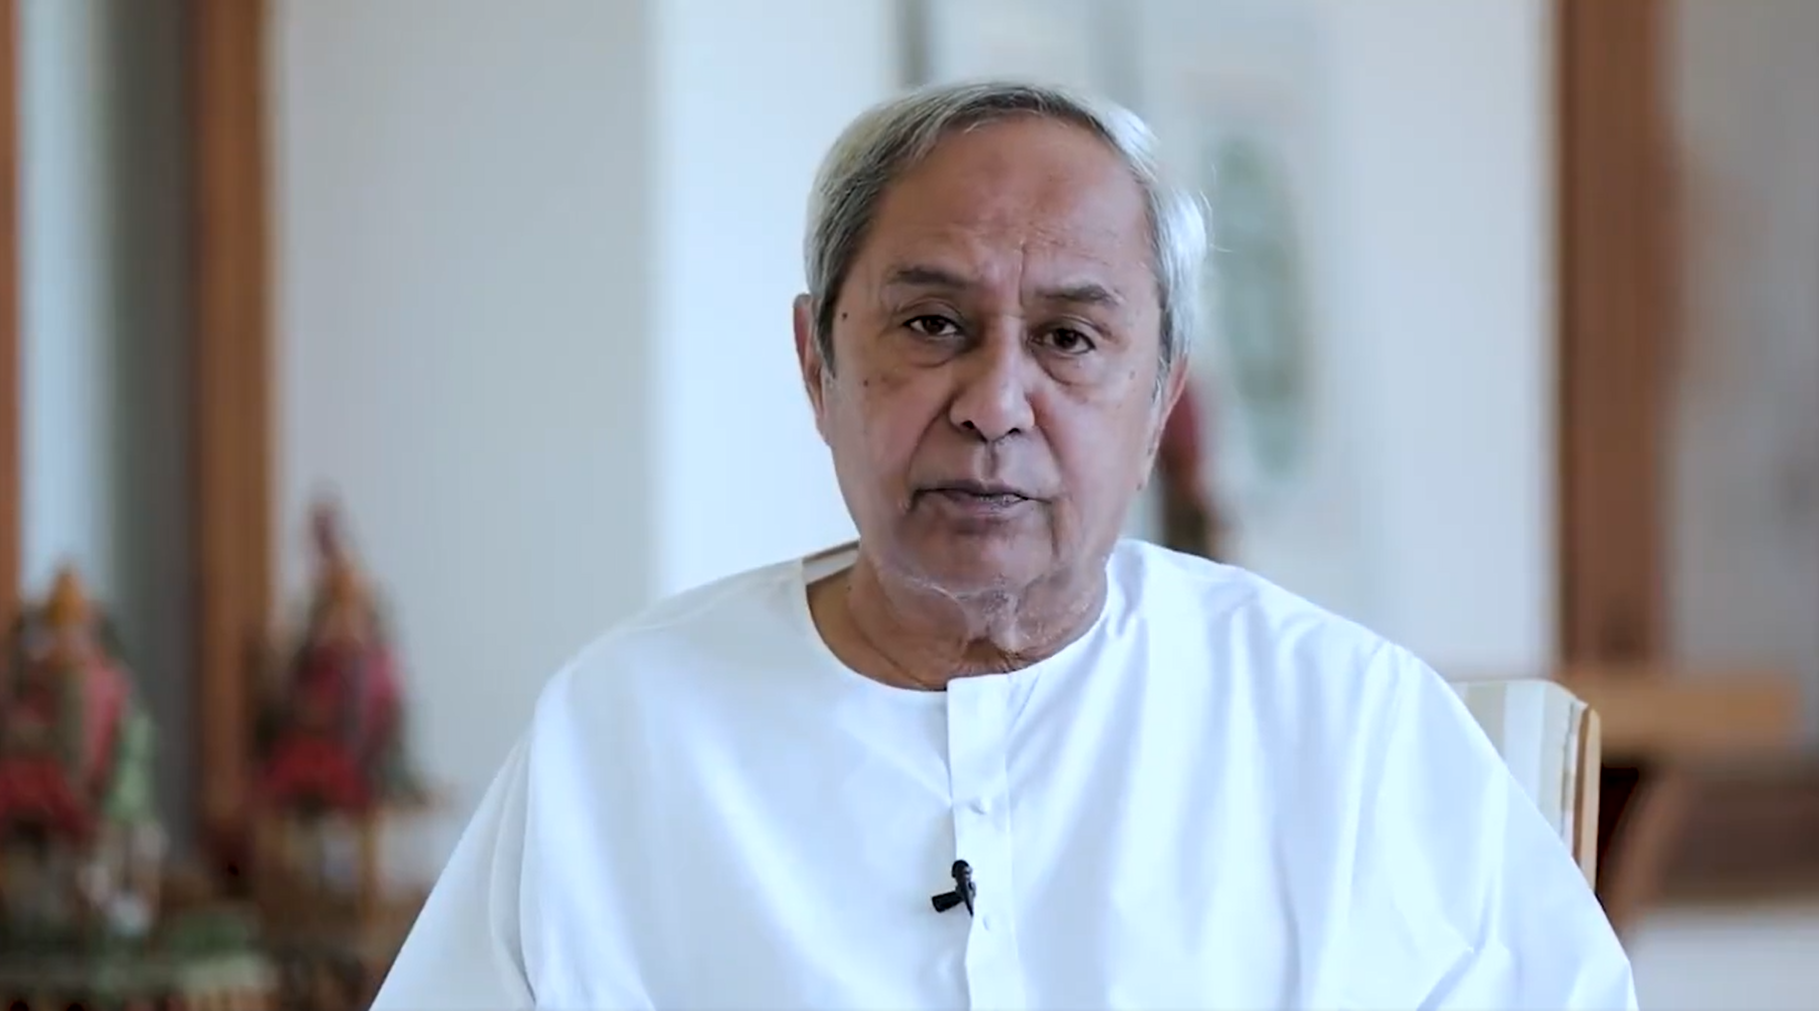 We will have to follow the Covid-19 restrictions properly to prevent the third wave: Odisha Chief Minister